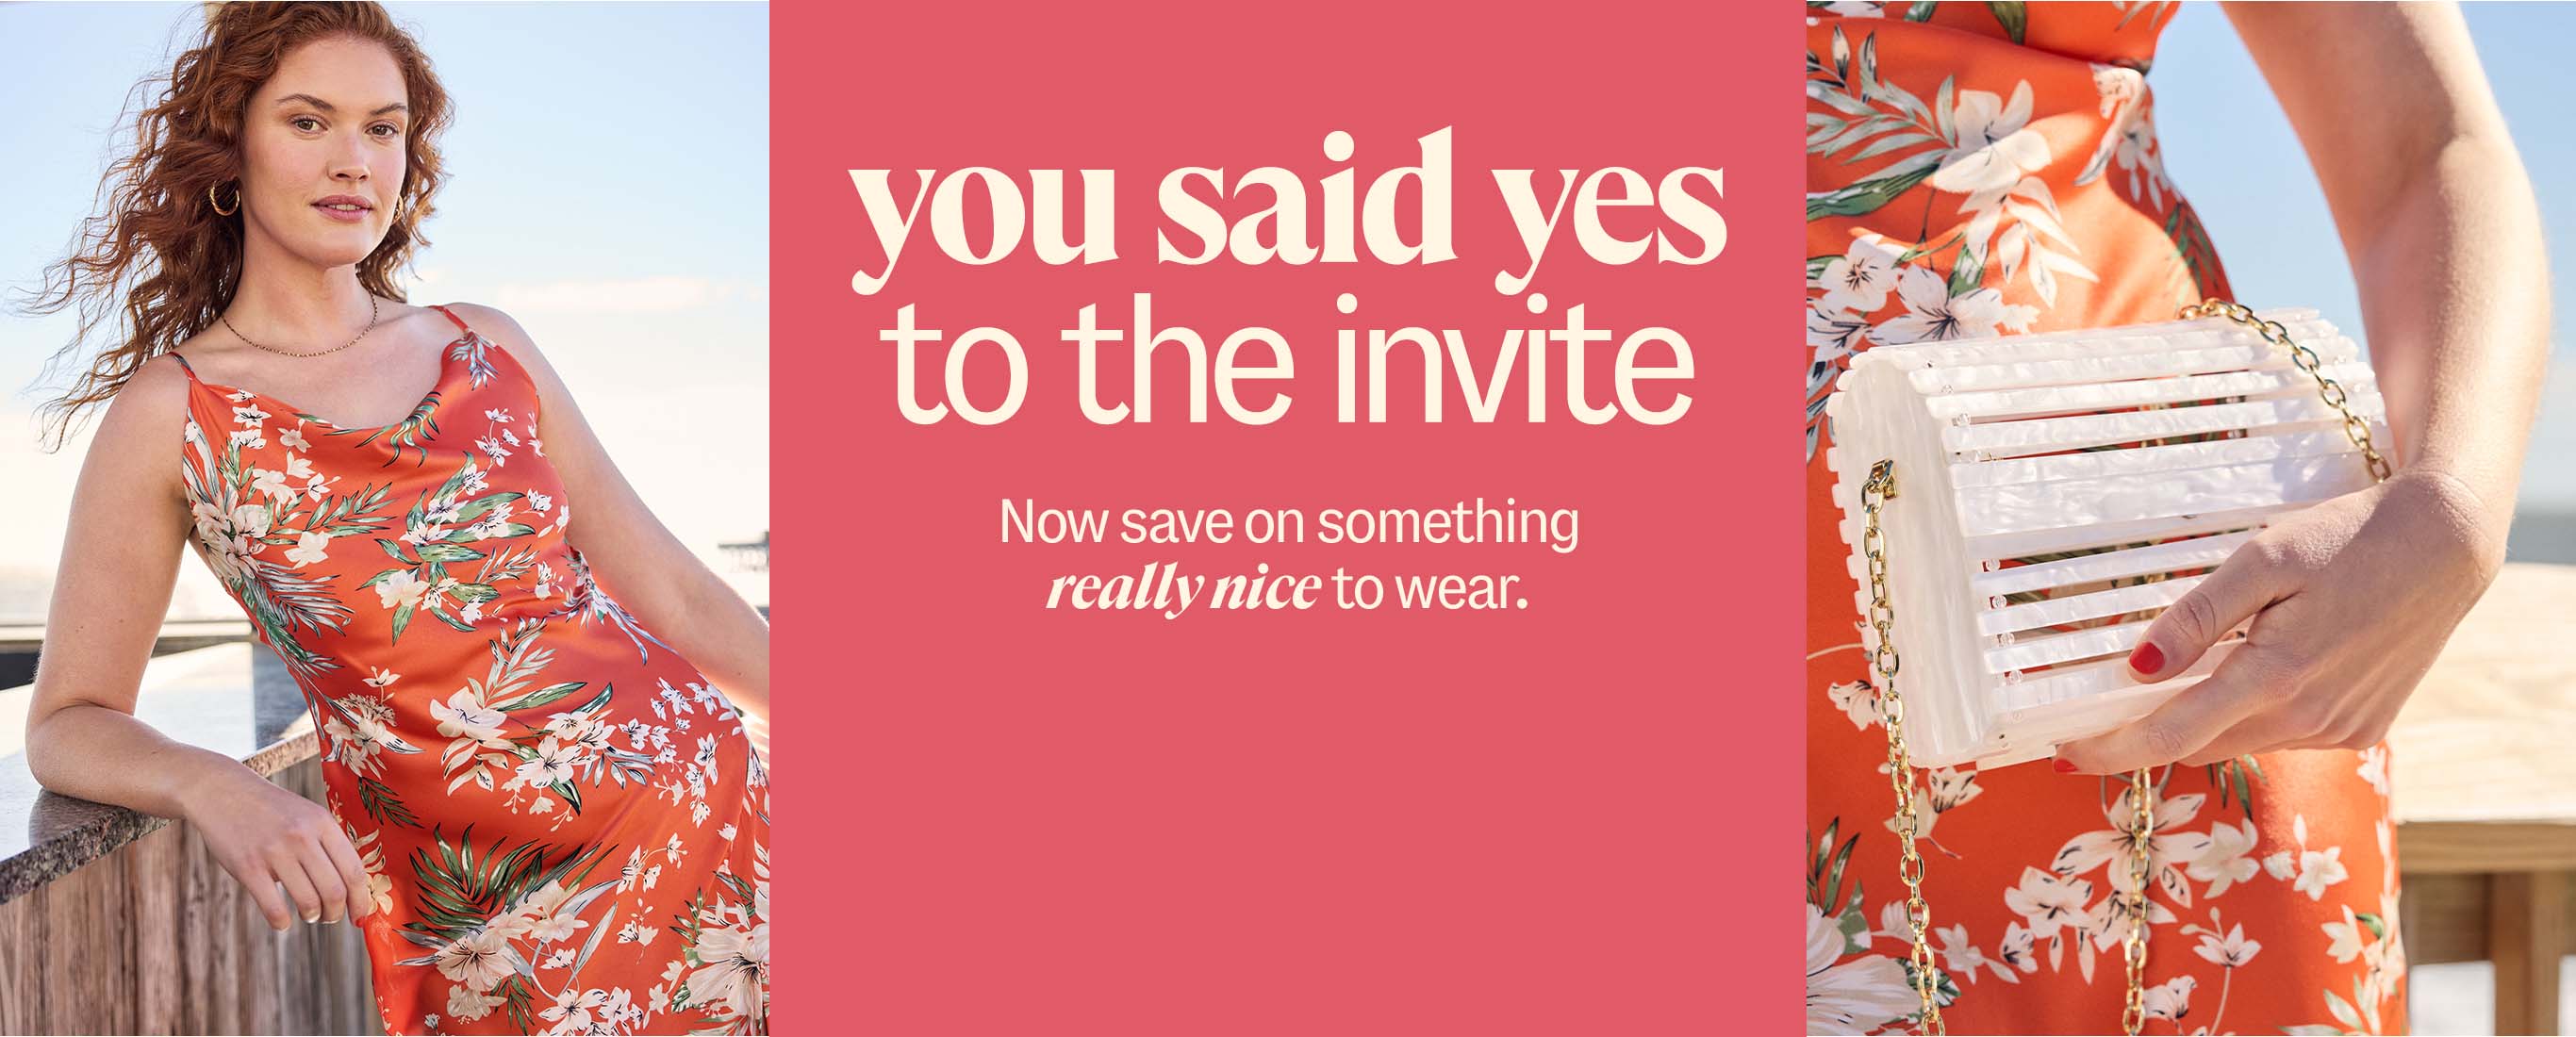 you said yes to the invite. Now save on something really nice to wear.